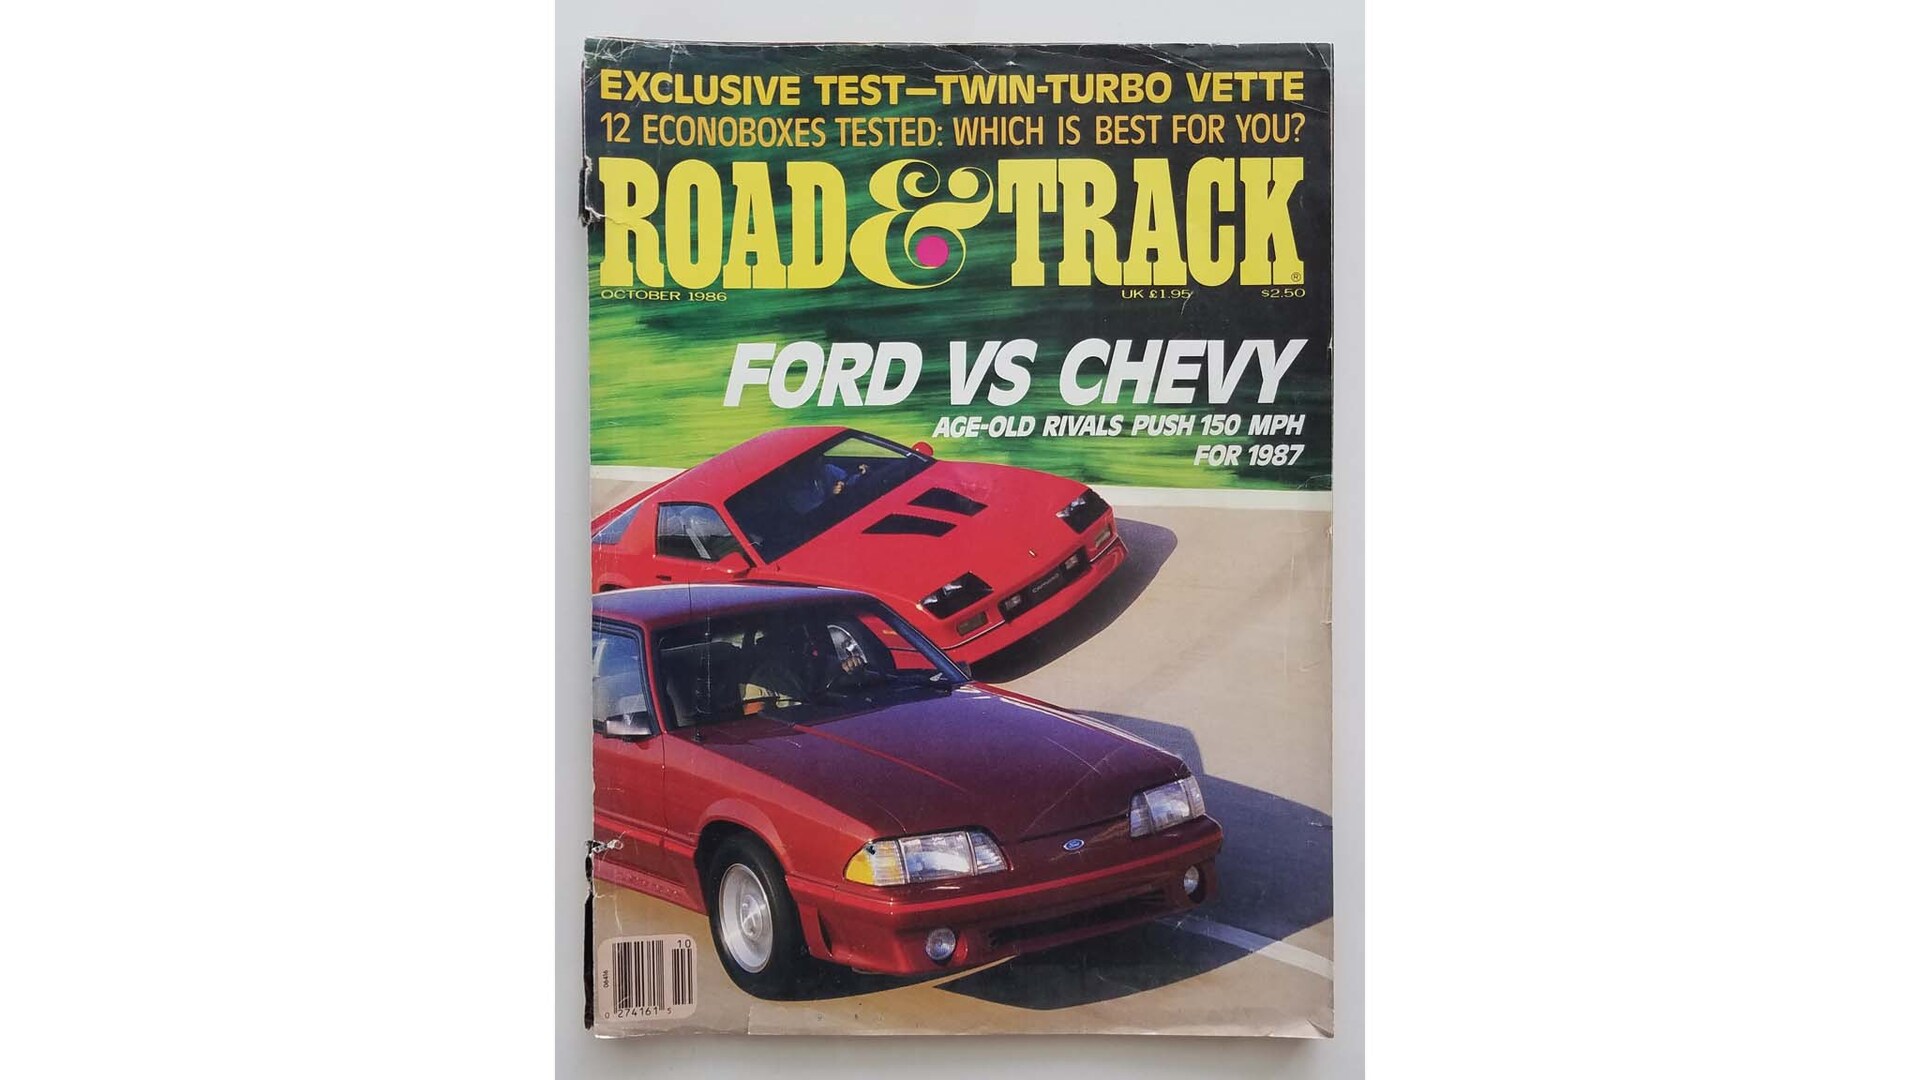 004 road and track october 1986 cover_1